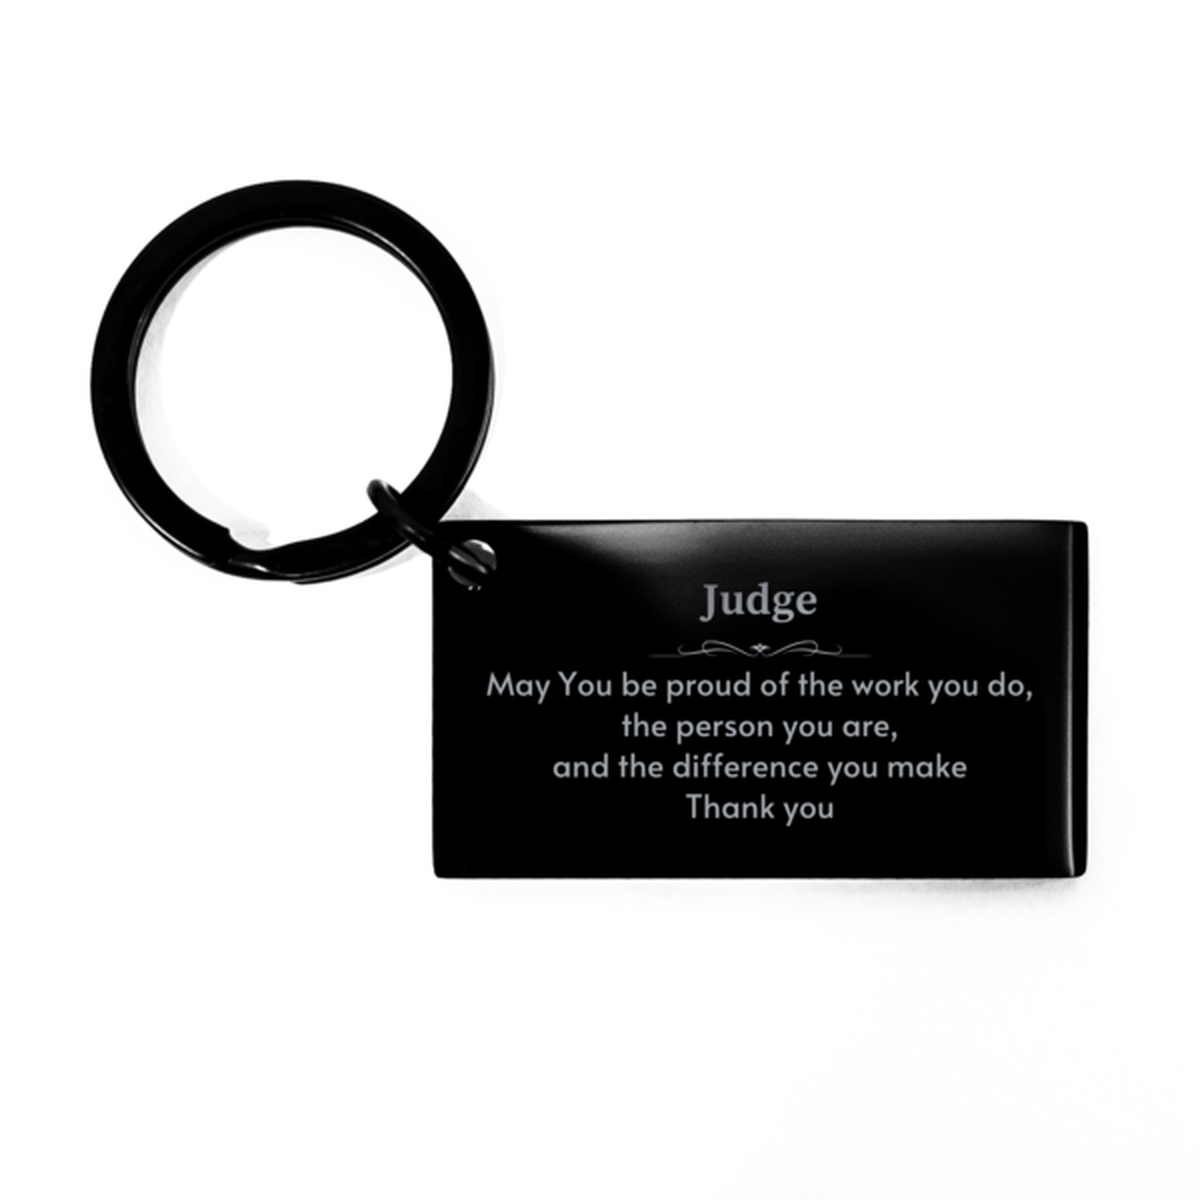 Heartwarming Keychain Retirement Coworkers Gifts for Judge, Music Teacher May You be proud of the work you do, the person you are Gifts for Boss Men Women Friends